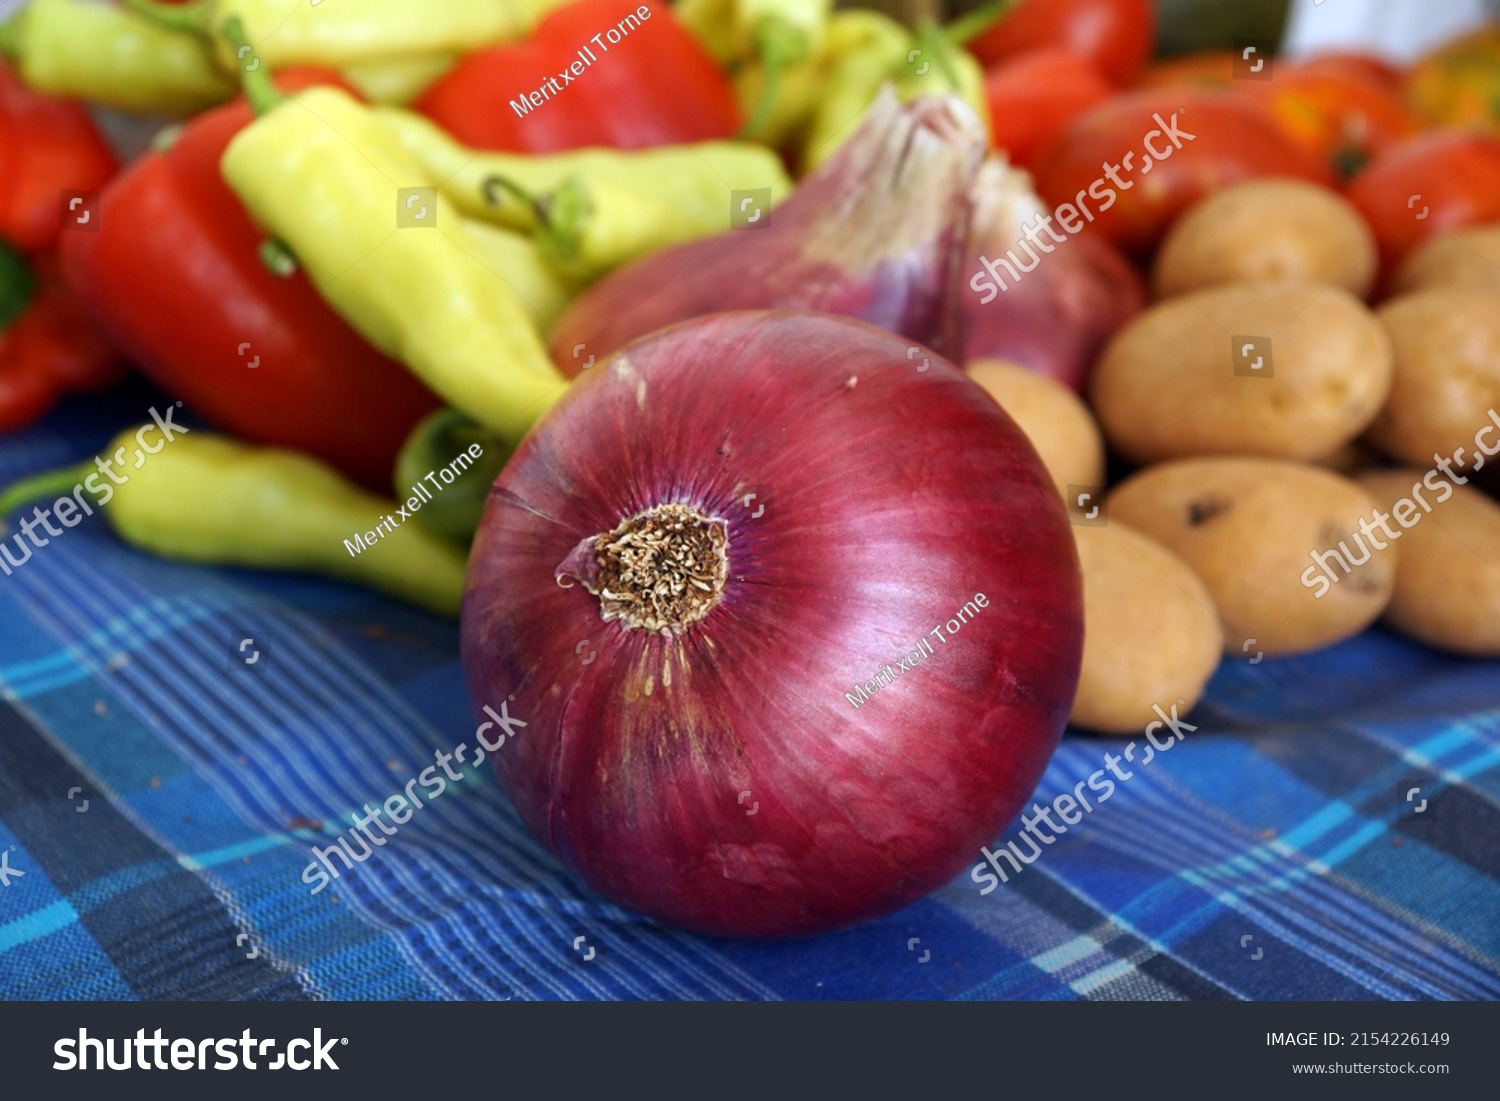 Closeup on a red onion and other harvest products #2154226149